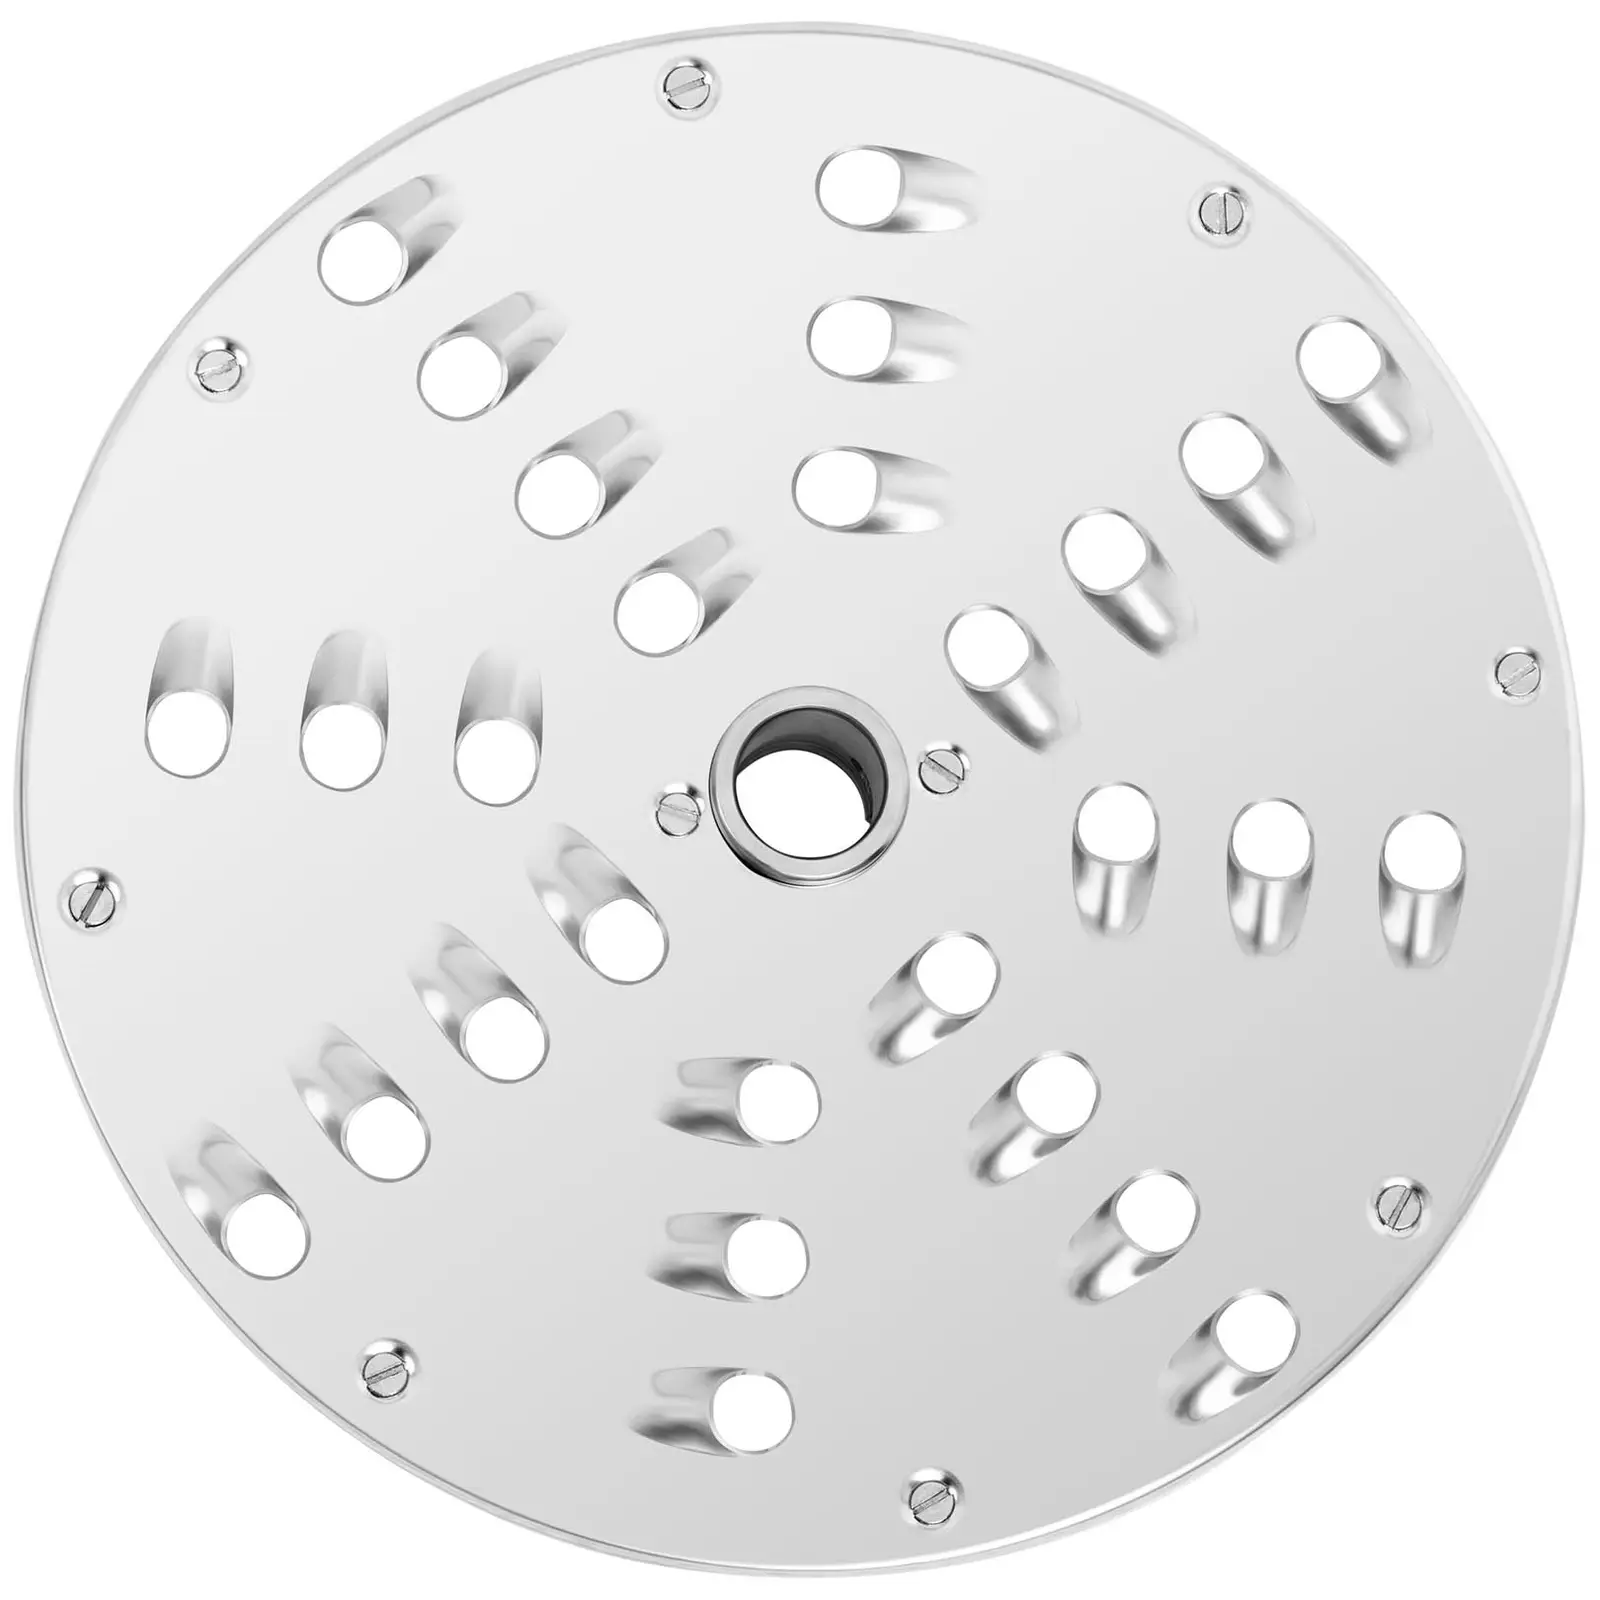 Shredding Disc - 205 mm - cut thickness 2 mm - stainless steel